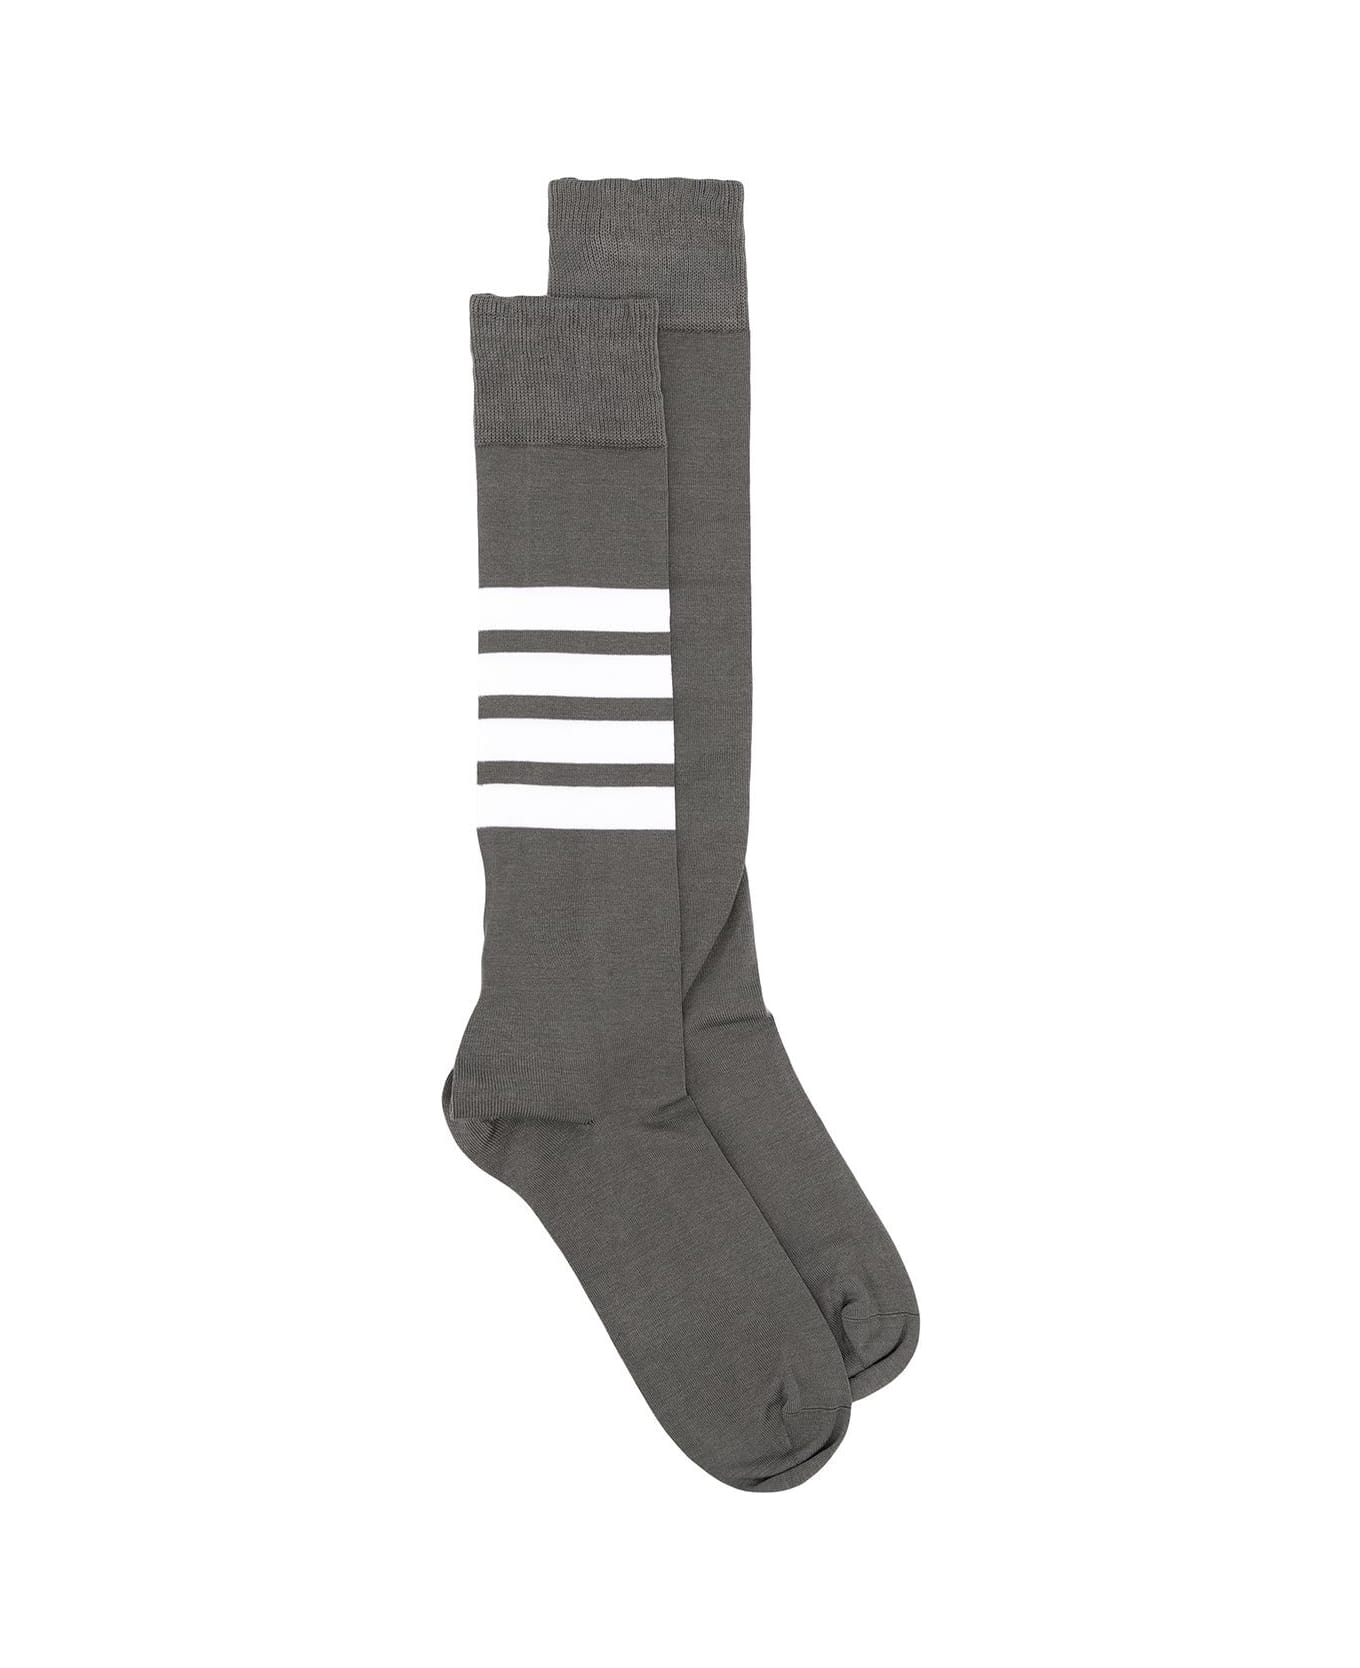 Thom Browne Over The Calf Socks With 4 Bar - Med Grey